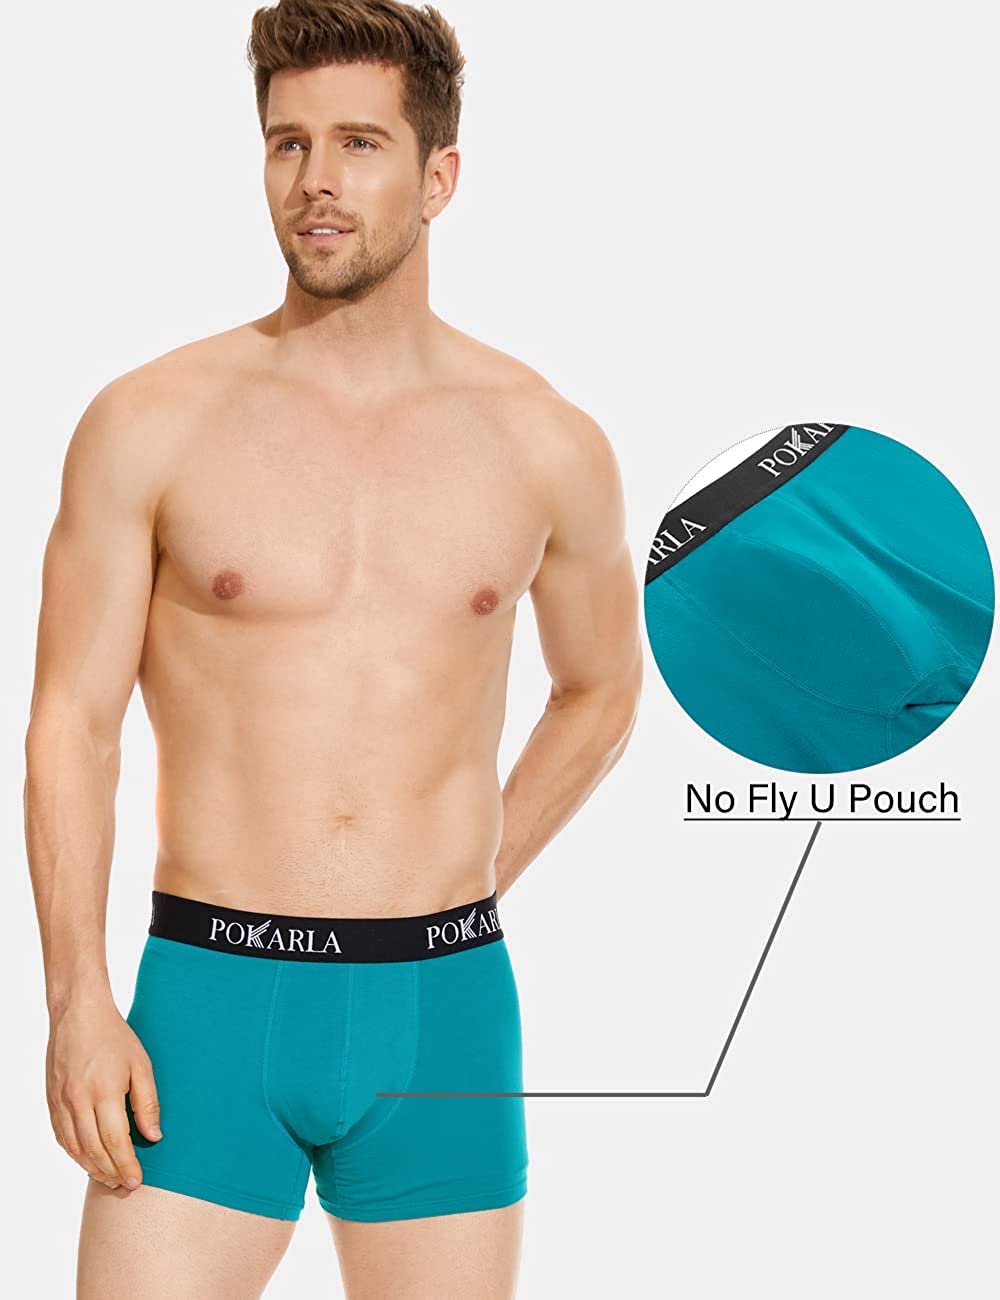 Pack Mens Cotton Stretch Trunks Underwear No Fly Tagless Underpants